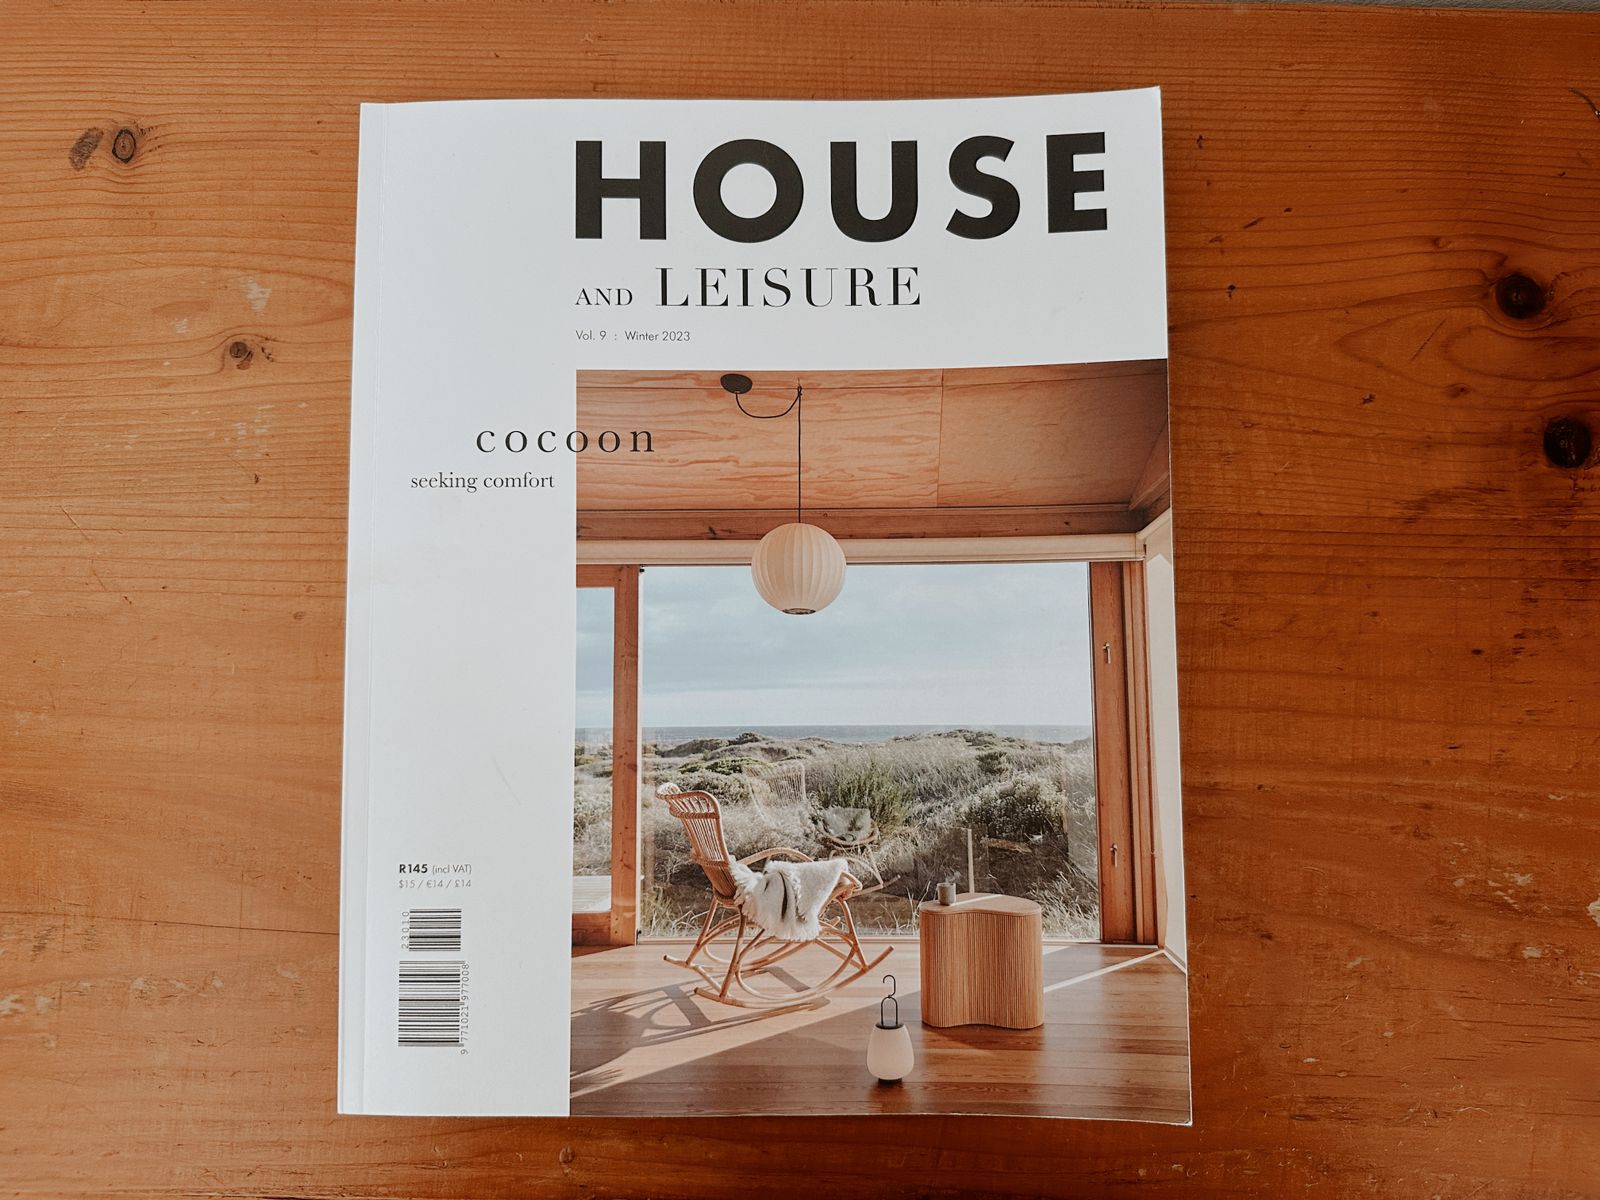 House & Leisure Vol. 9 'Cocoon' Issue